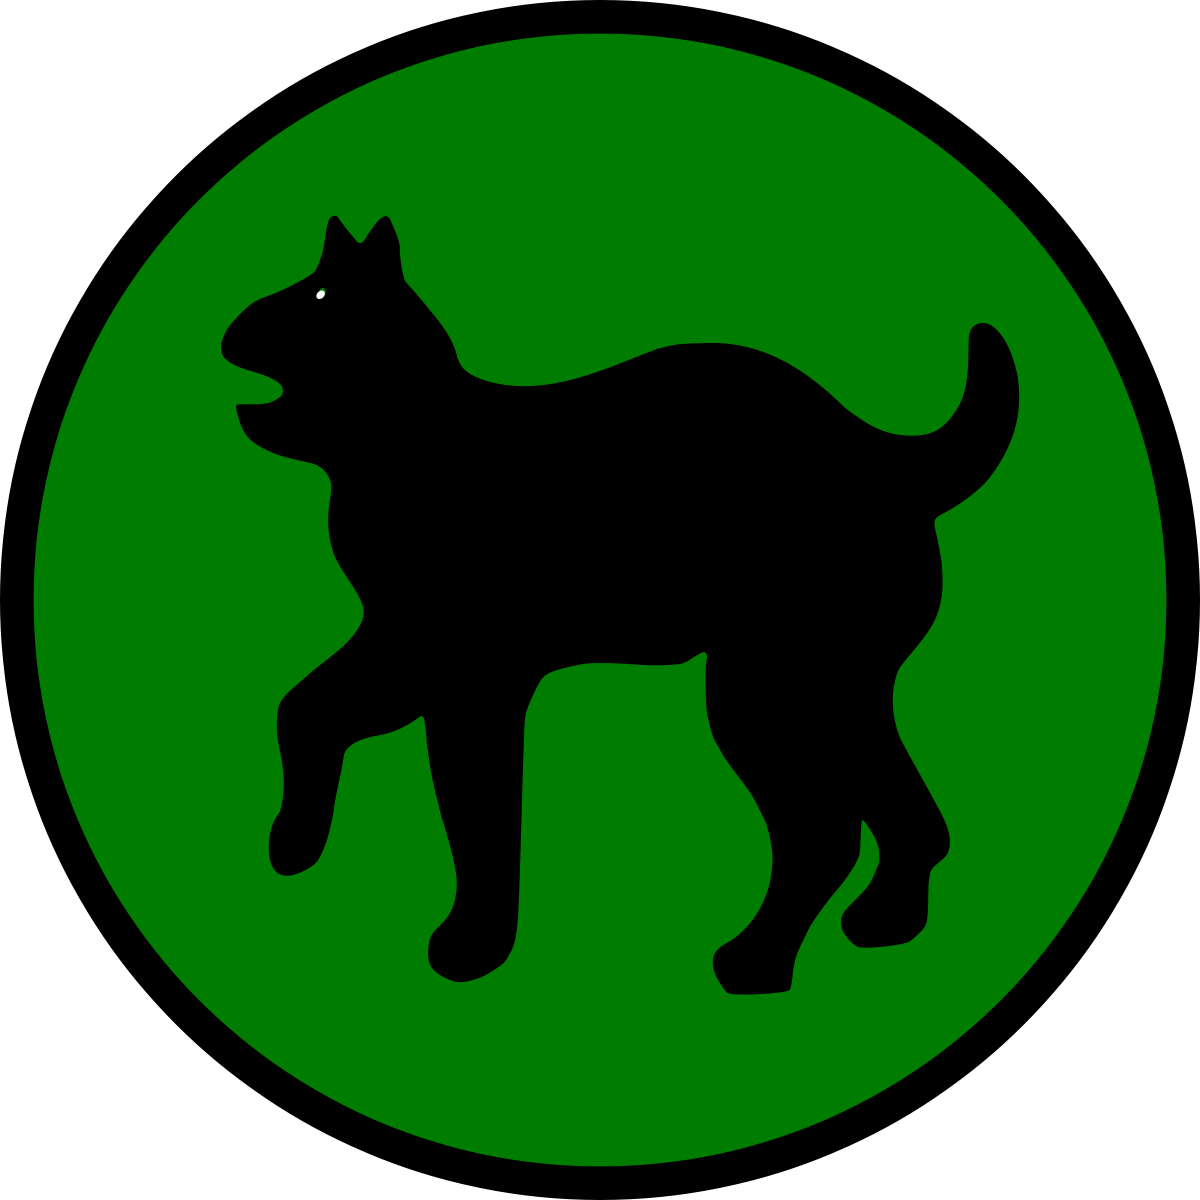 Us 81st Infantry Division Wildcat (1200x1200)